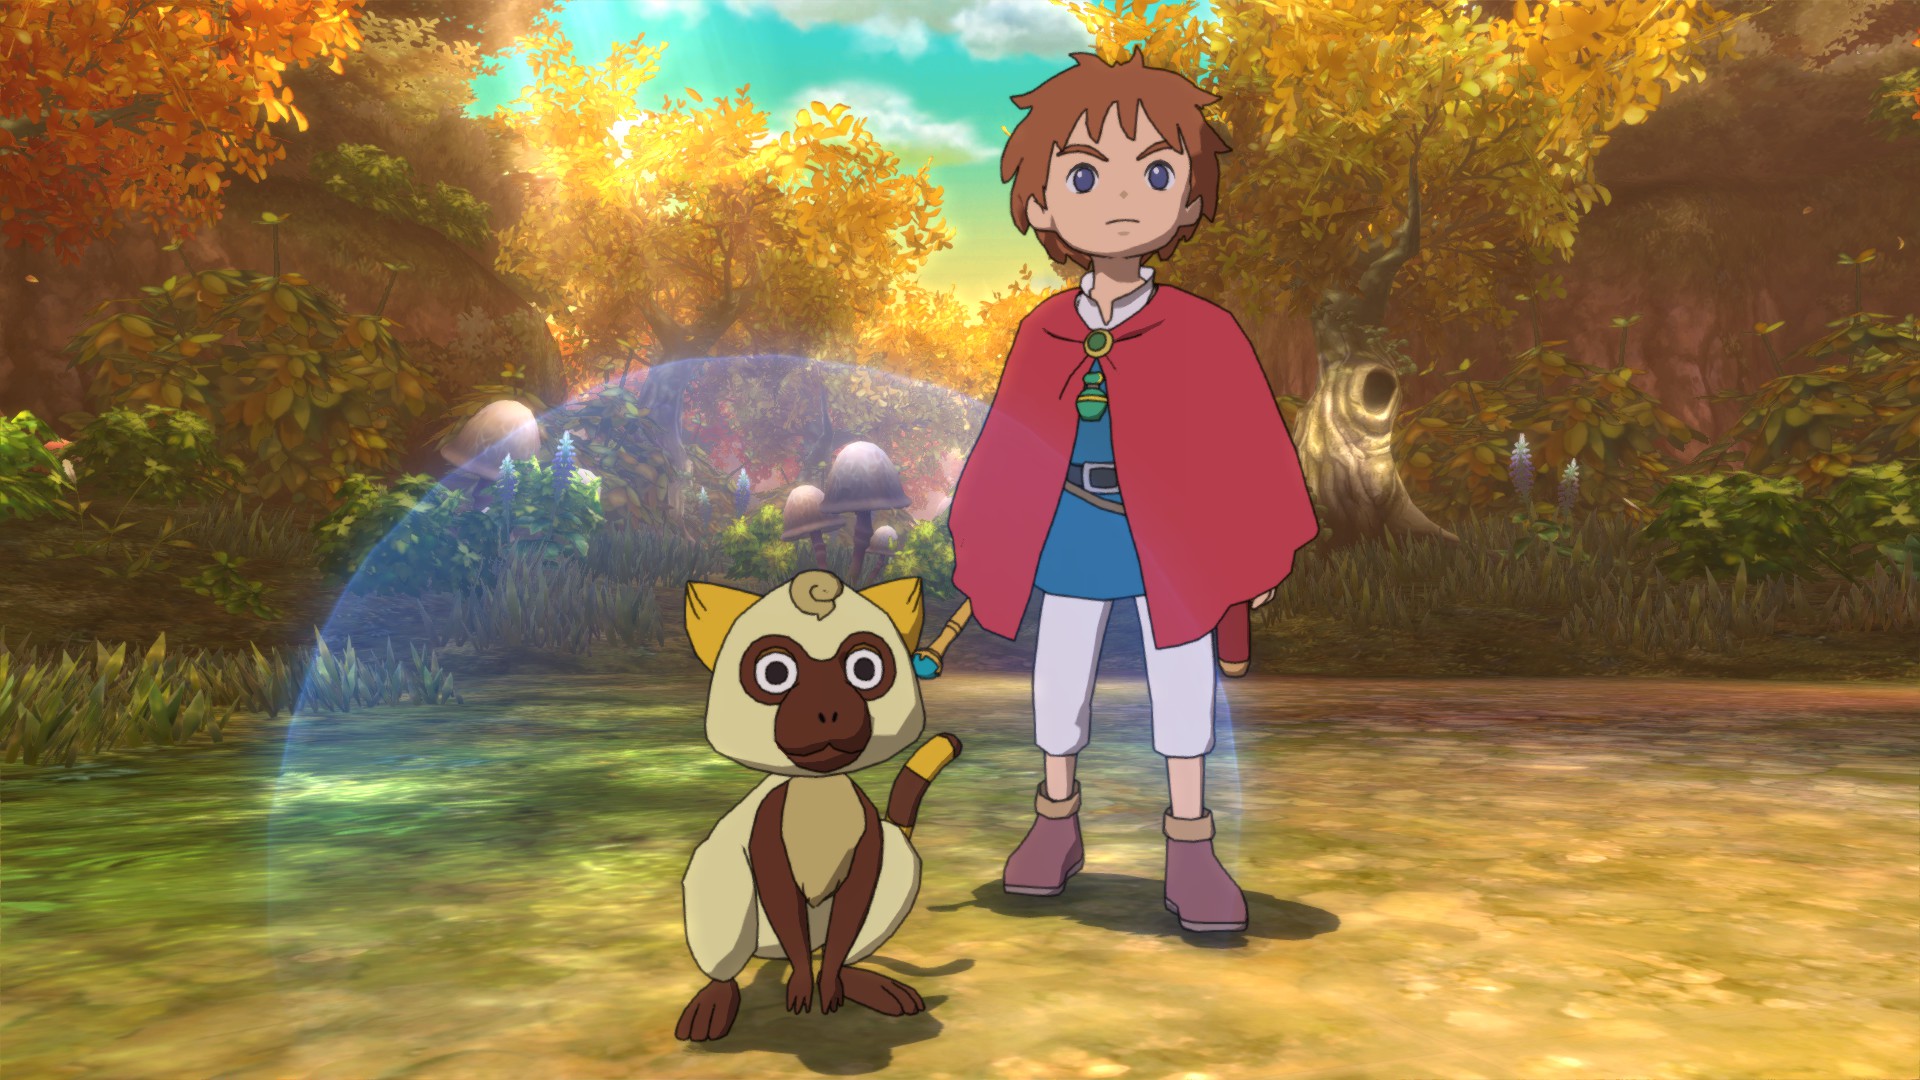 Main character and Familiar from Ni no Kuni: Wrath of the White Witch.